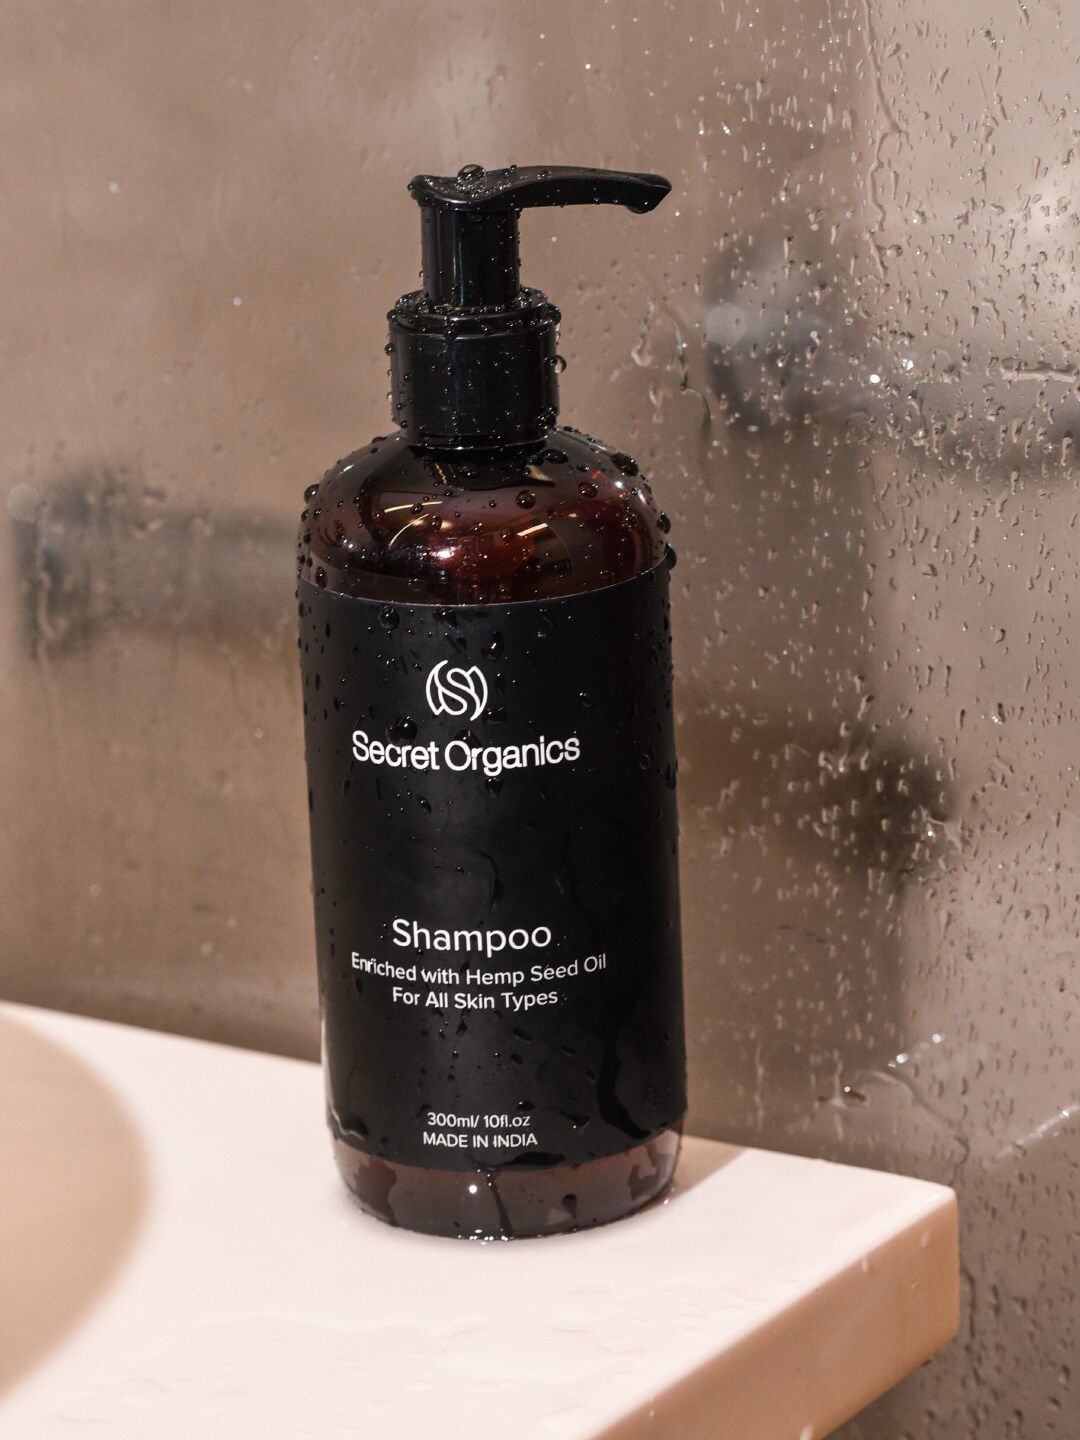 Secret Organics Shampoo with Hemp Seed Oil for All Skin Types 300 ml Price in India